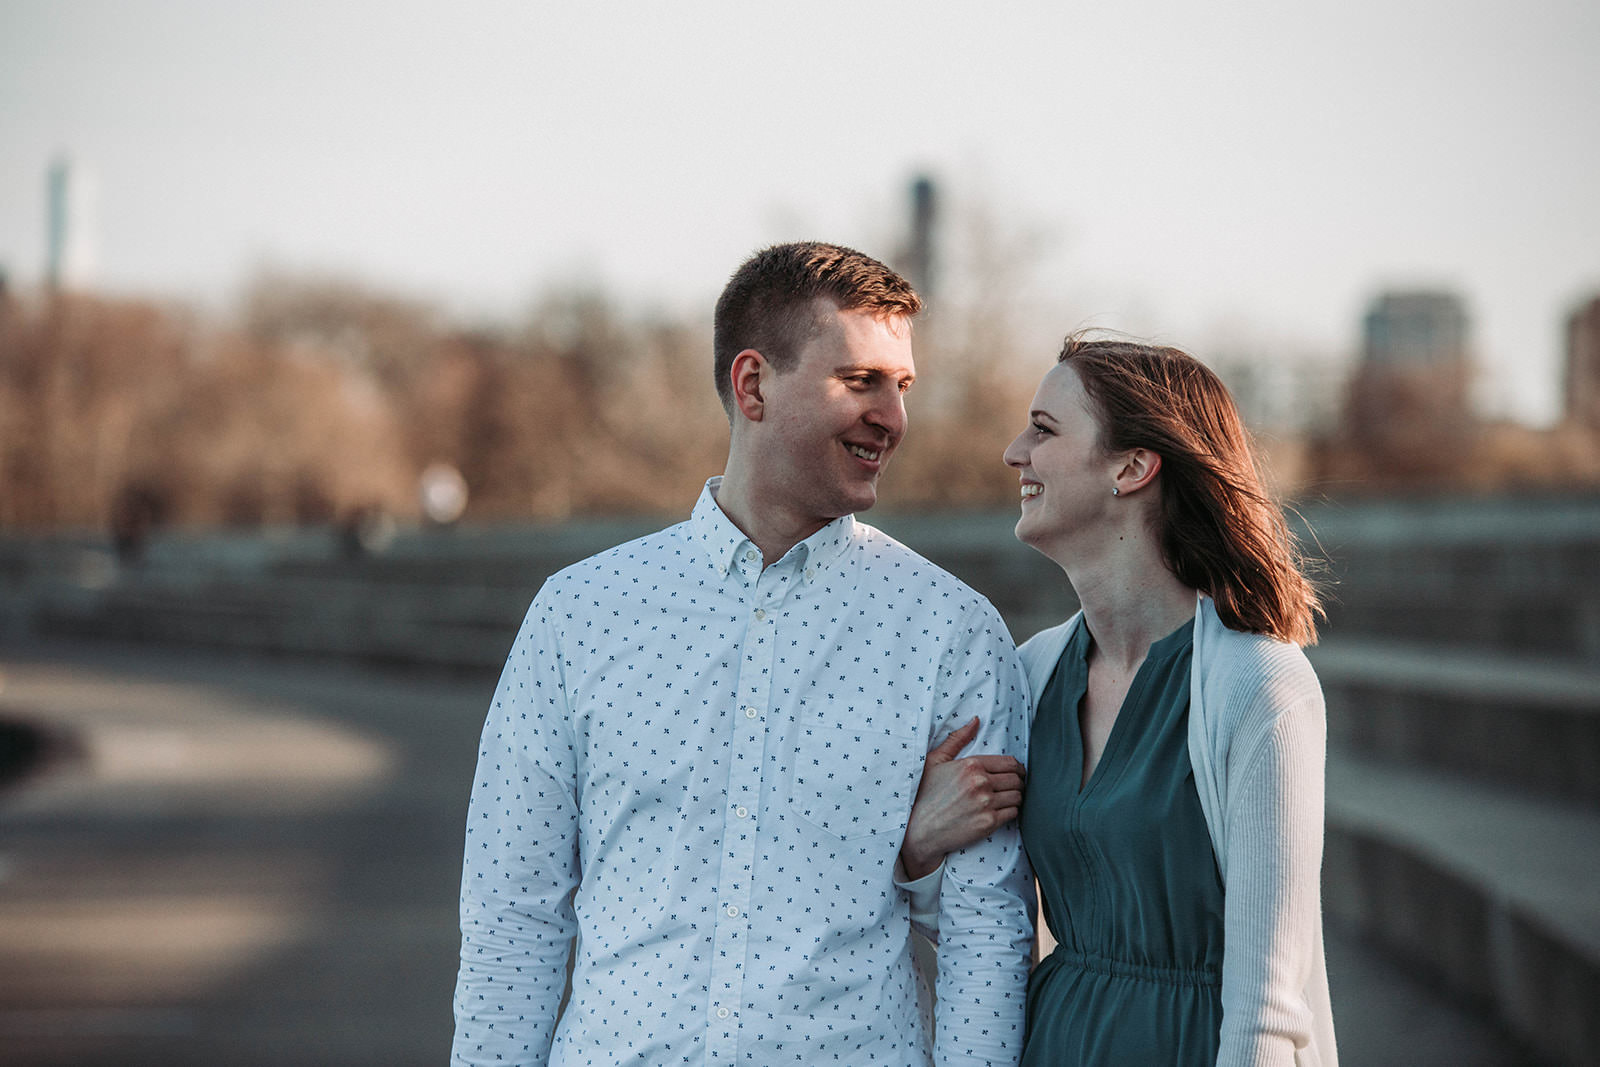 Downtown_chicago_spring_engagement_session-45.jpg